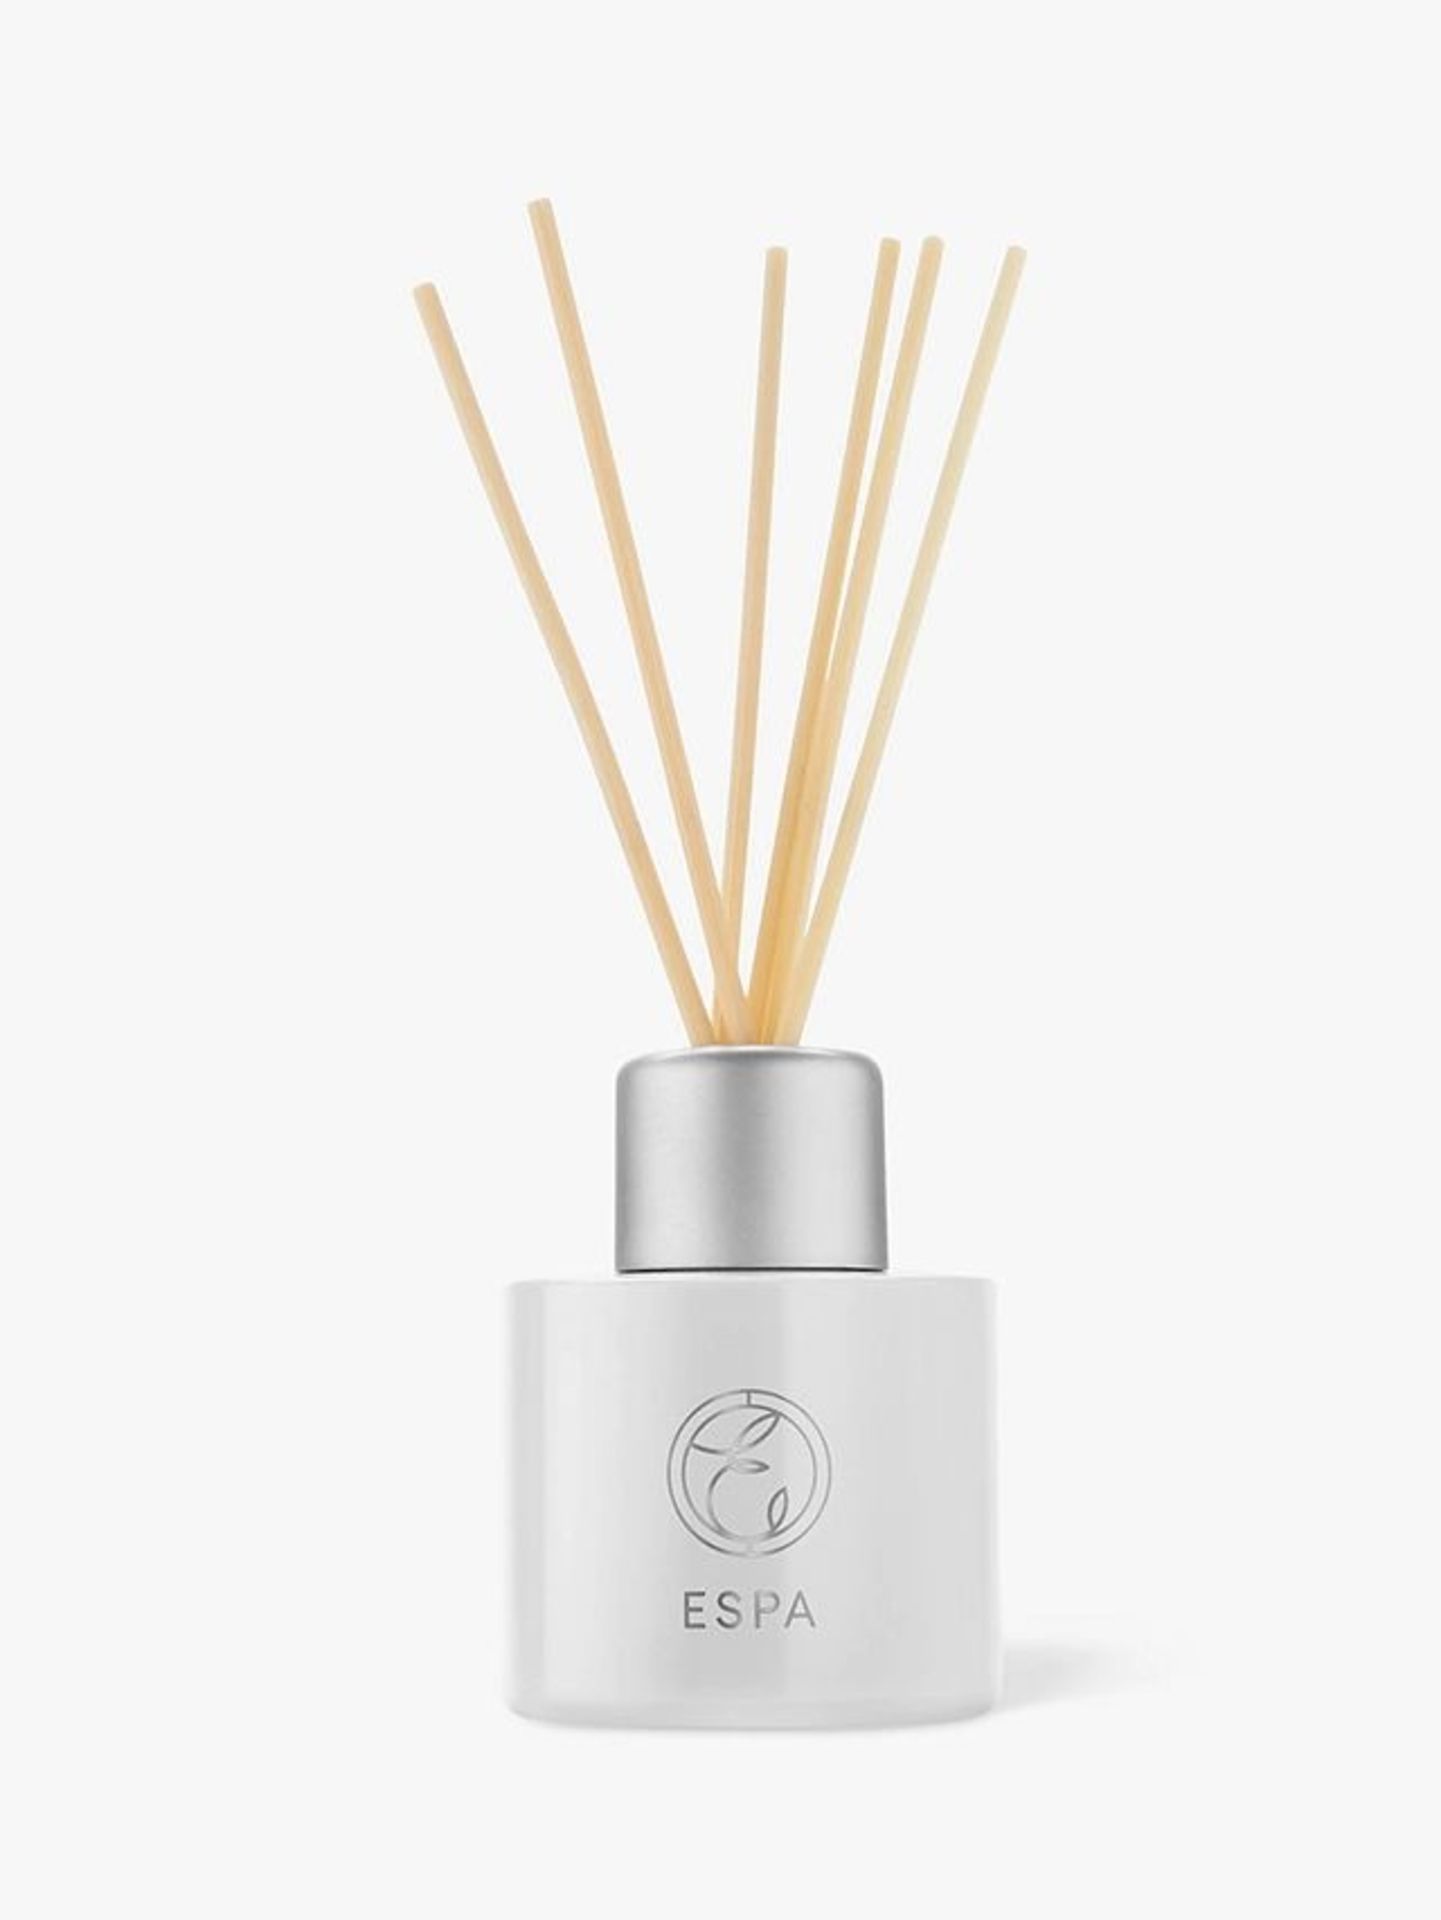 6x NEW ESPA Positivity Reed Diffuser 200ml. RRP £48 EACH. EBRM. When a room is clouded with